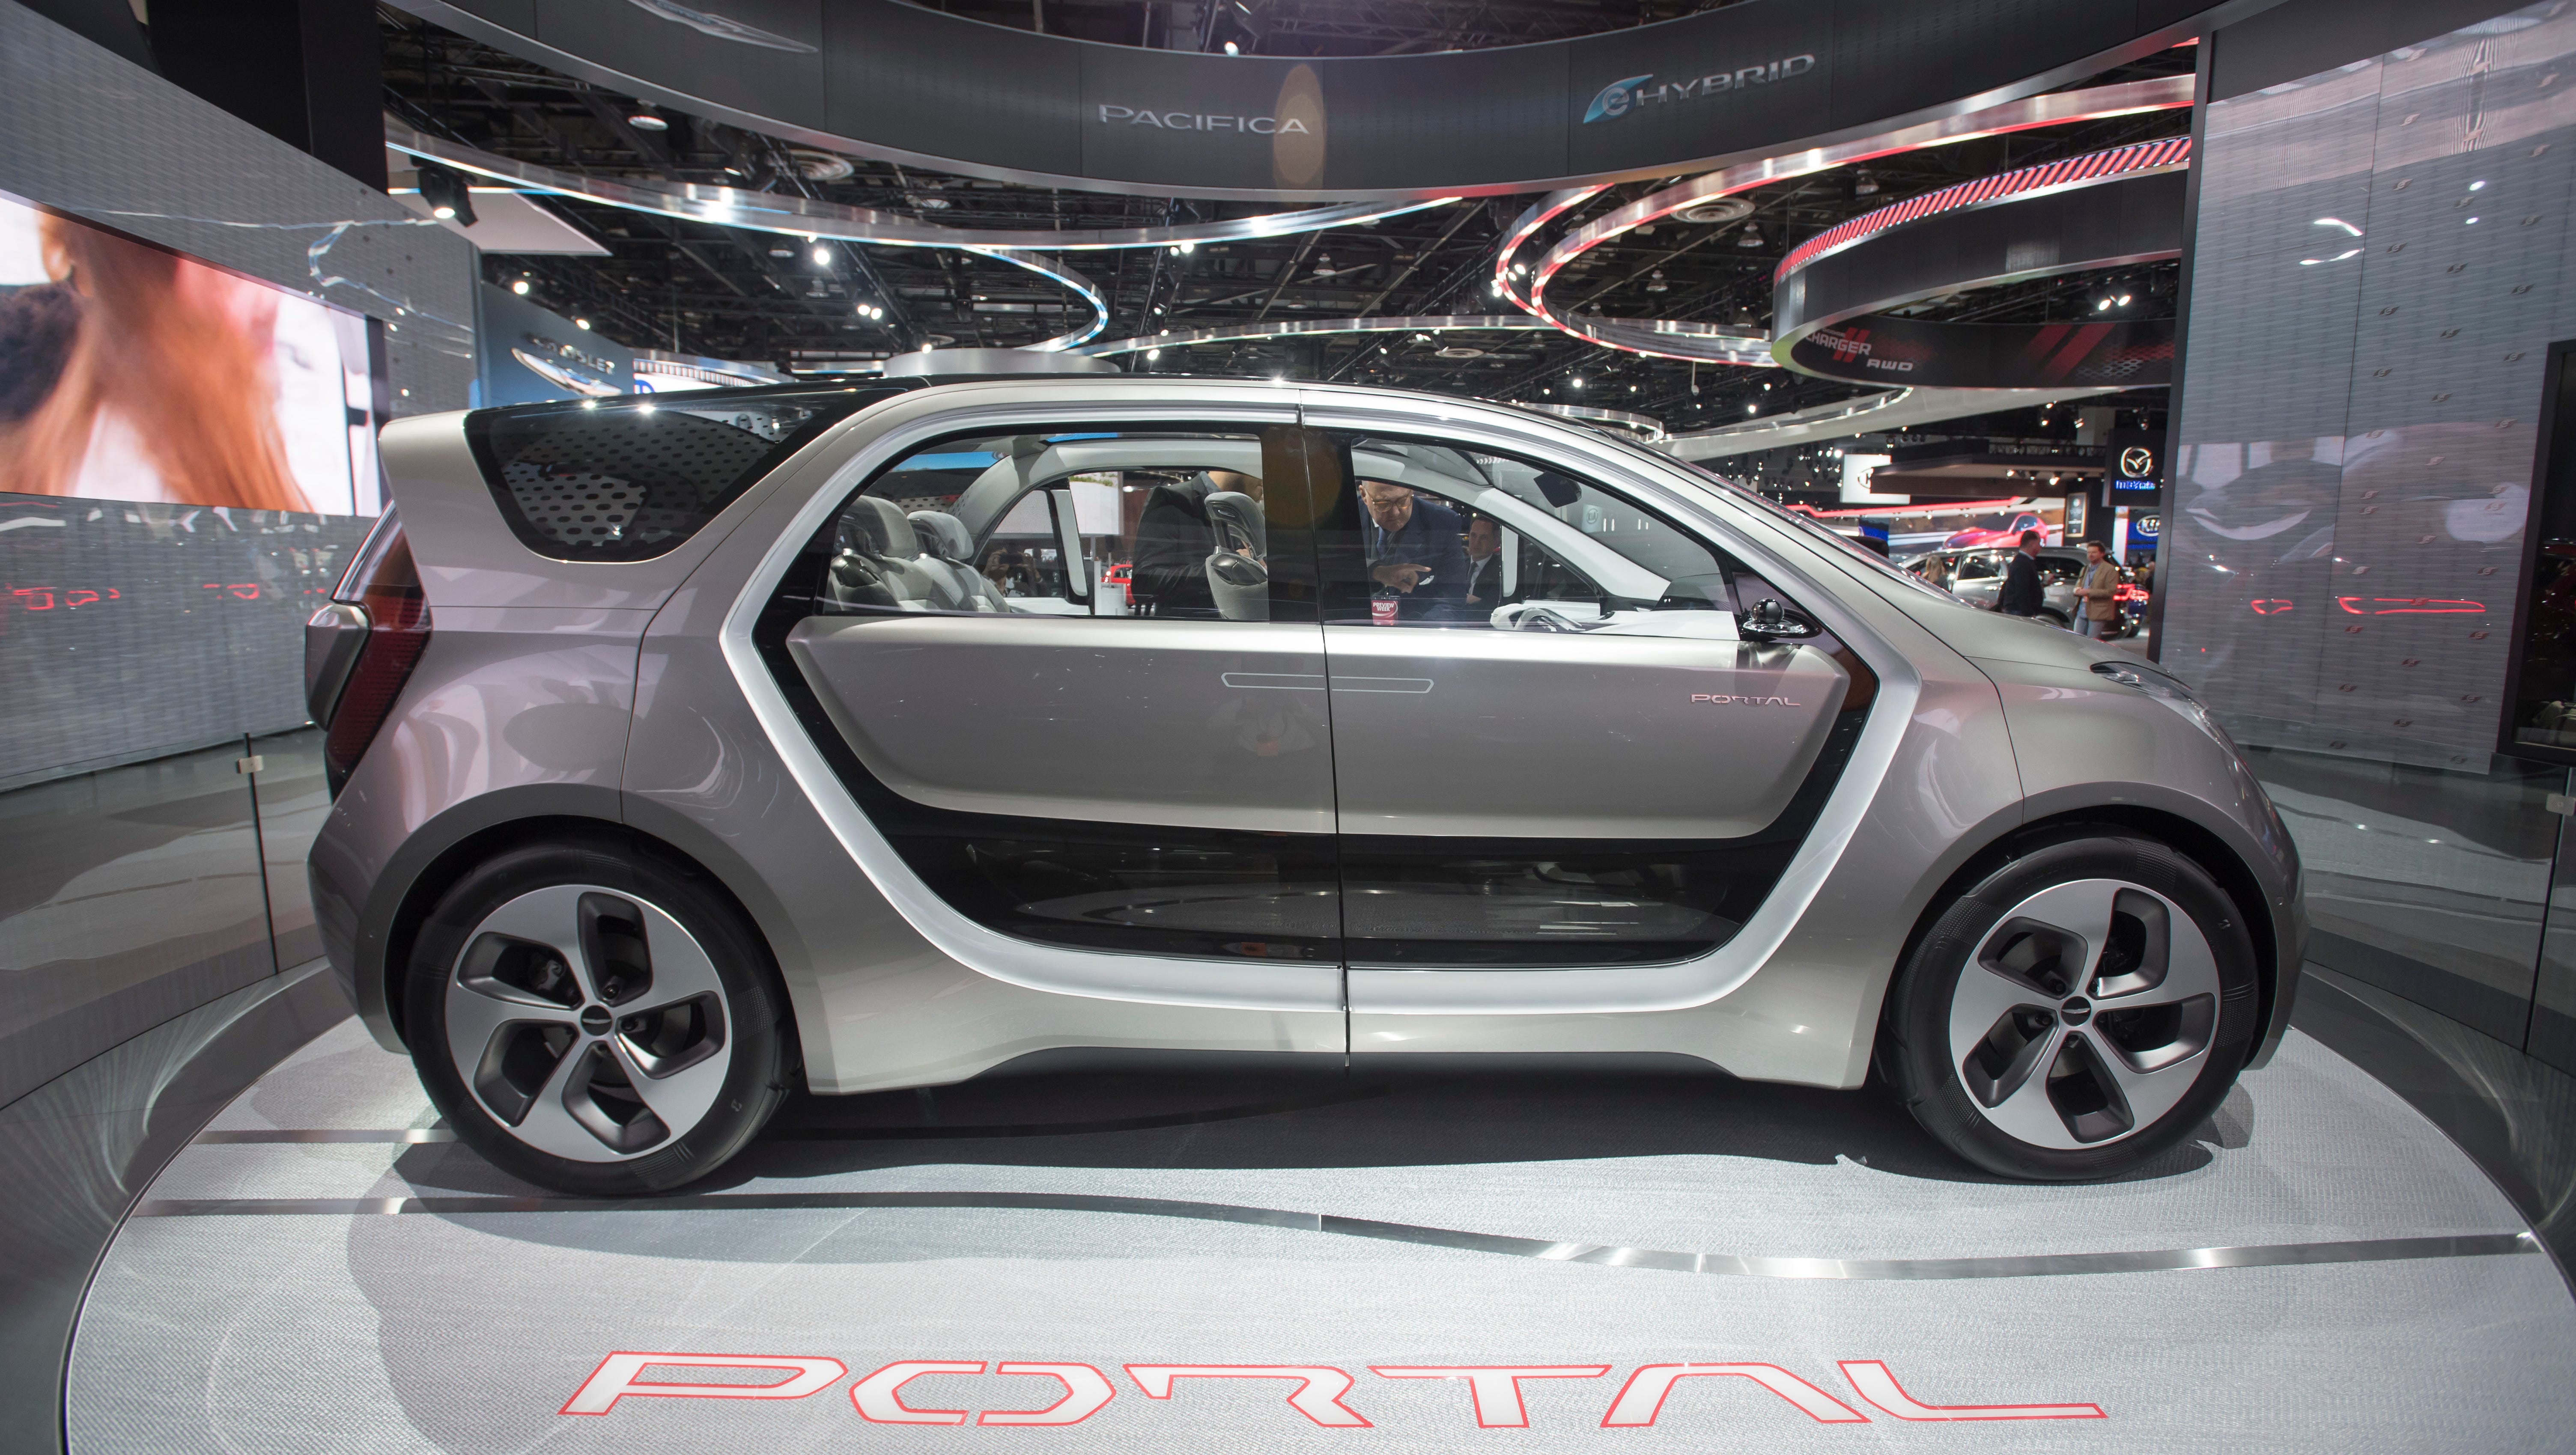 The Chrysler Portal concept has portal-shaped articulating front and rear doors.